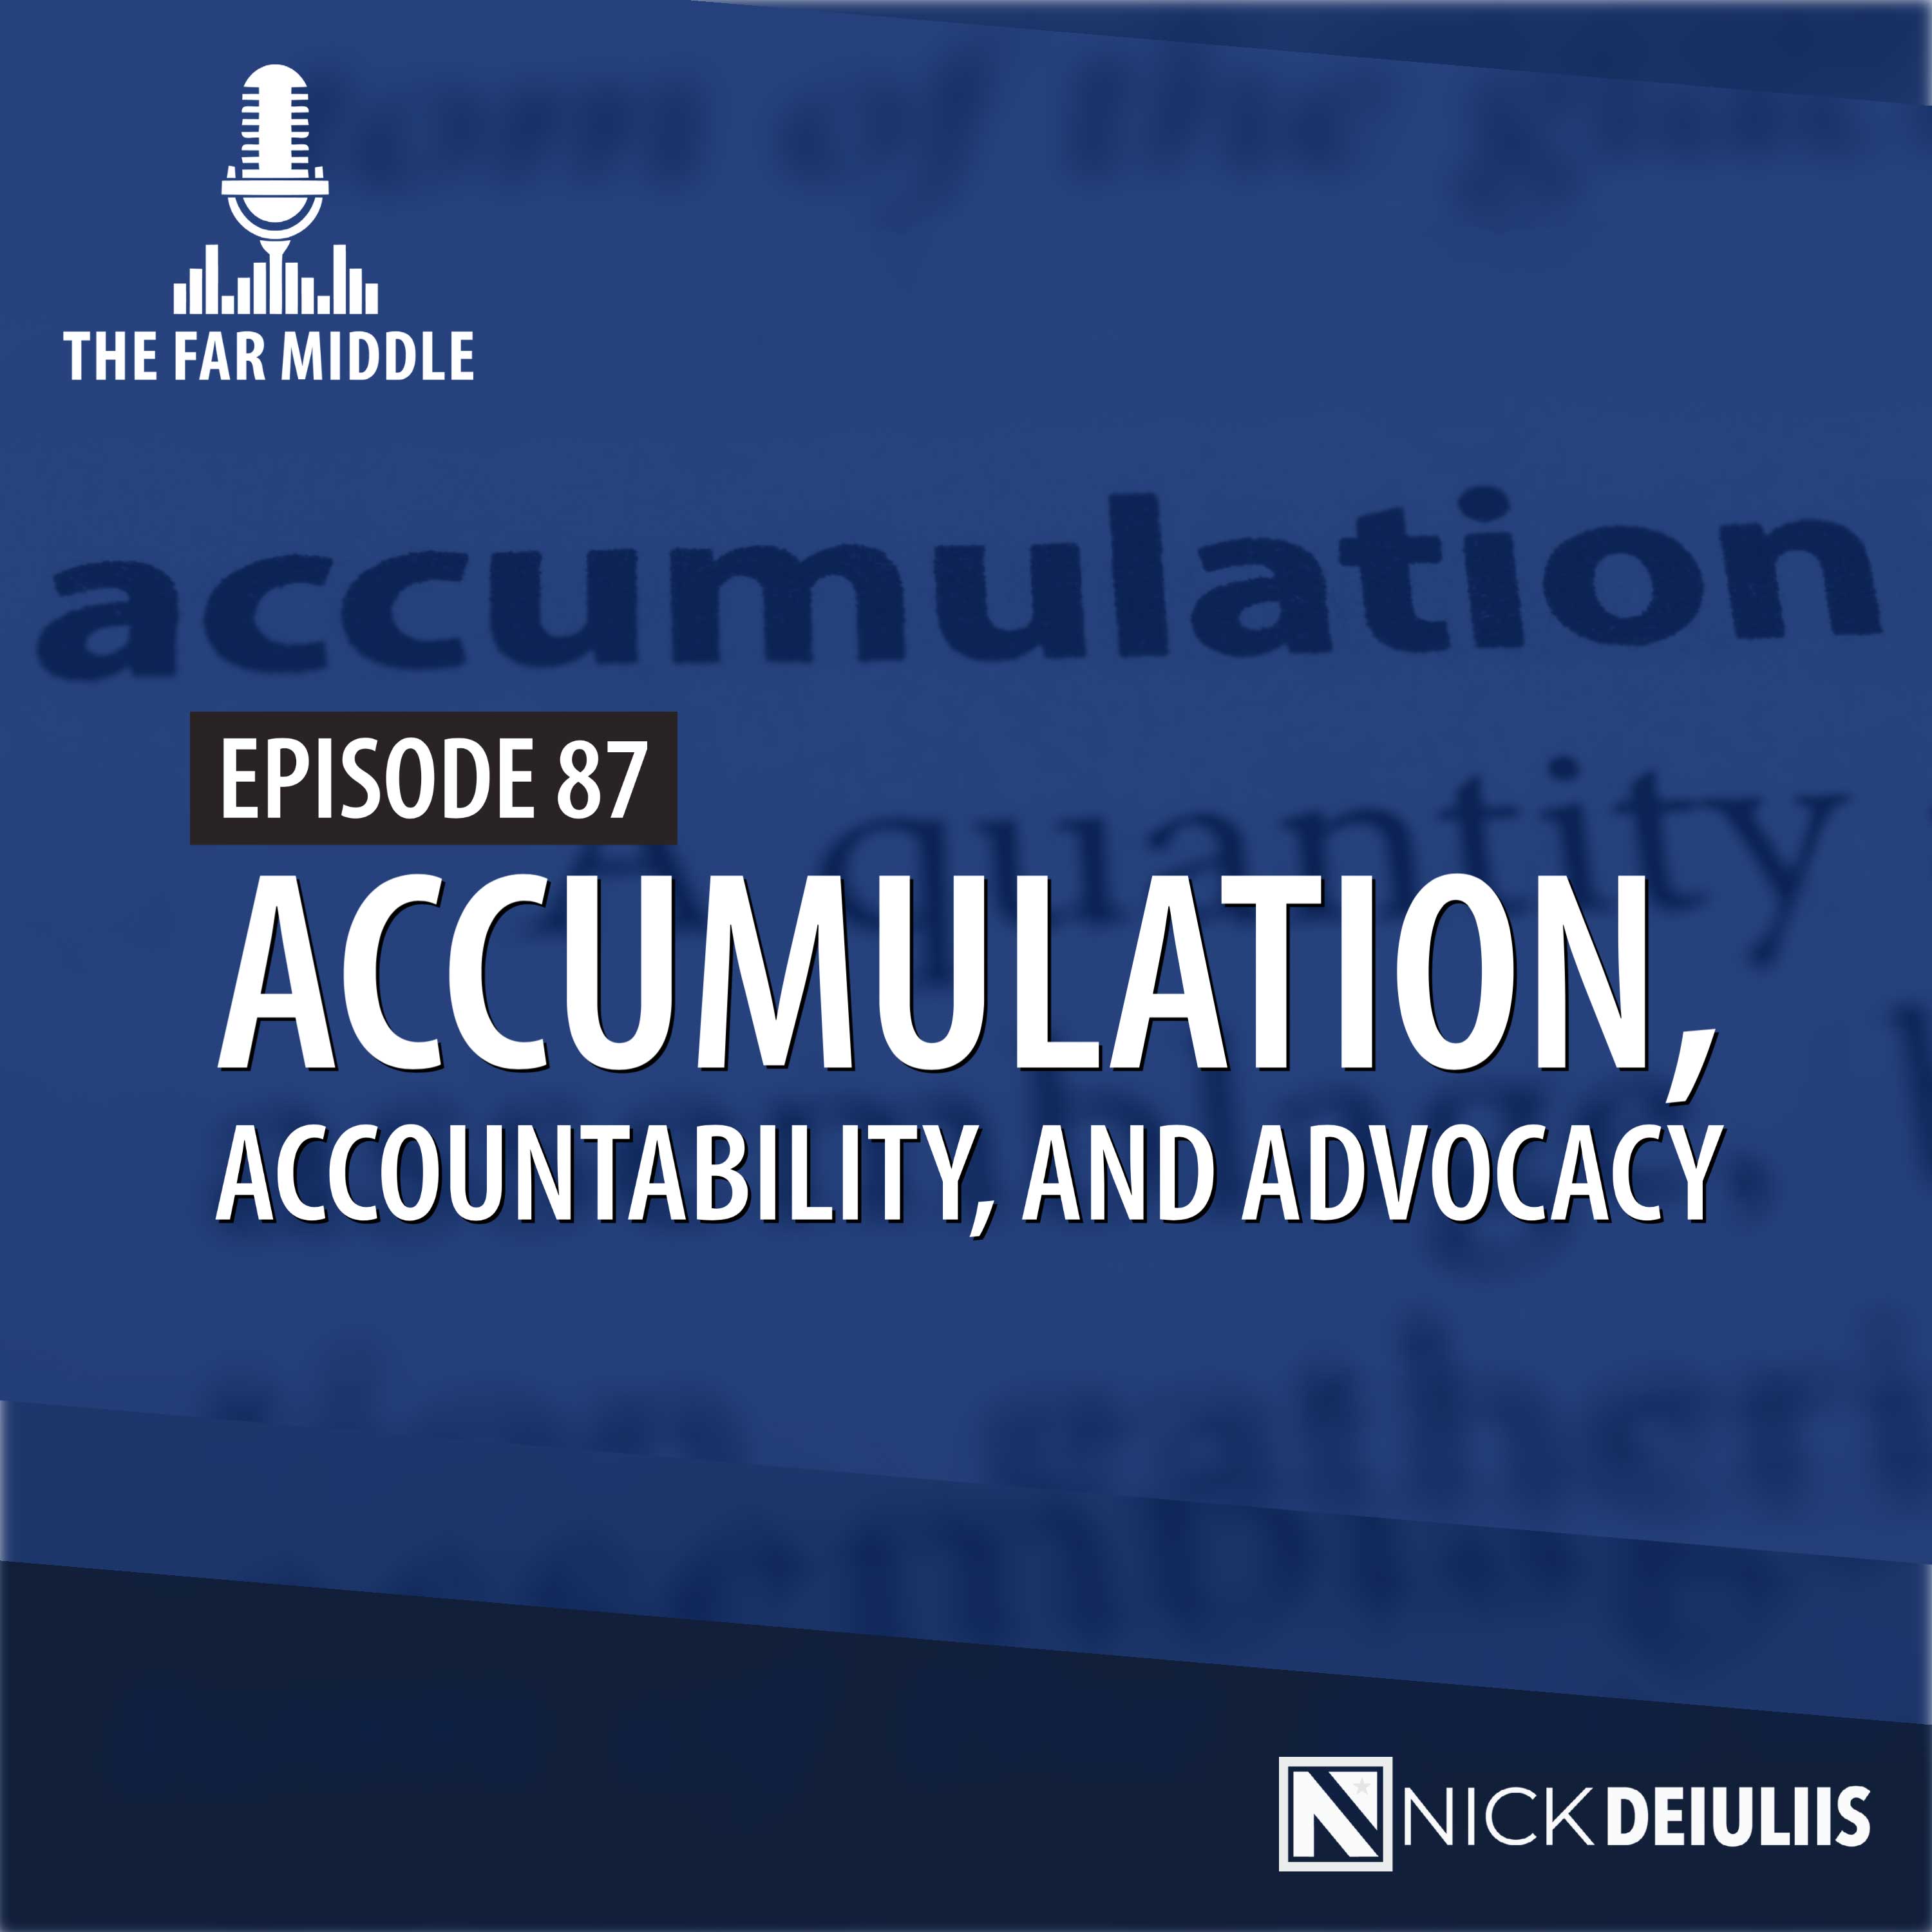 Accumulation, Accountability, and Advocacy